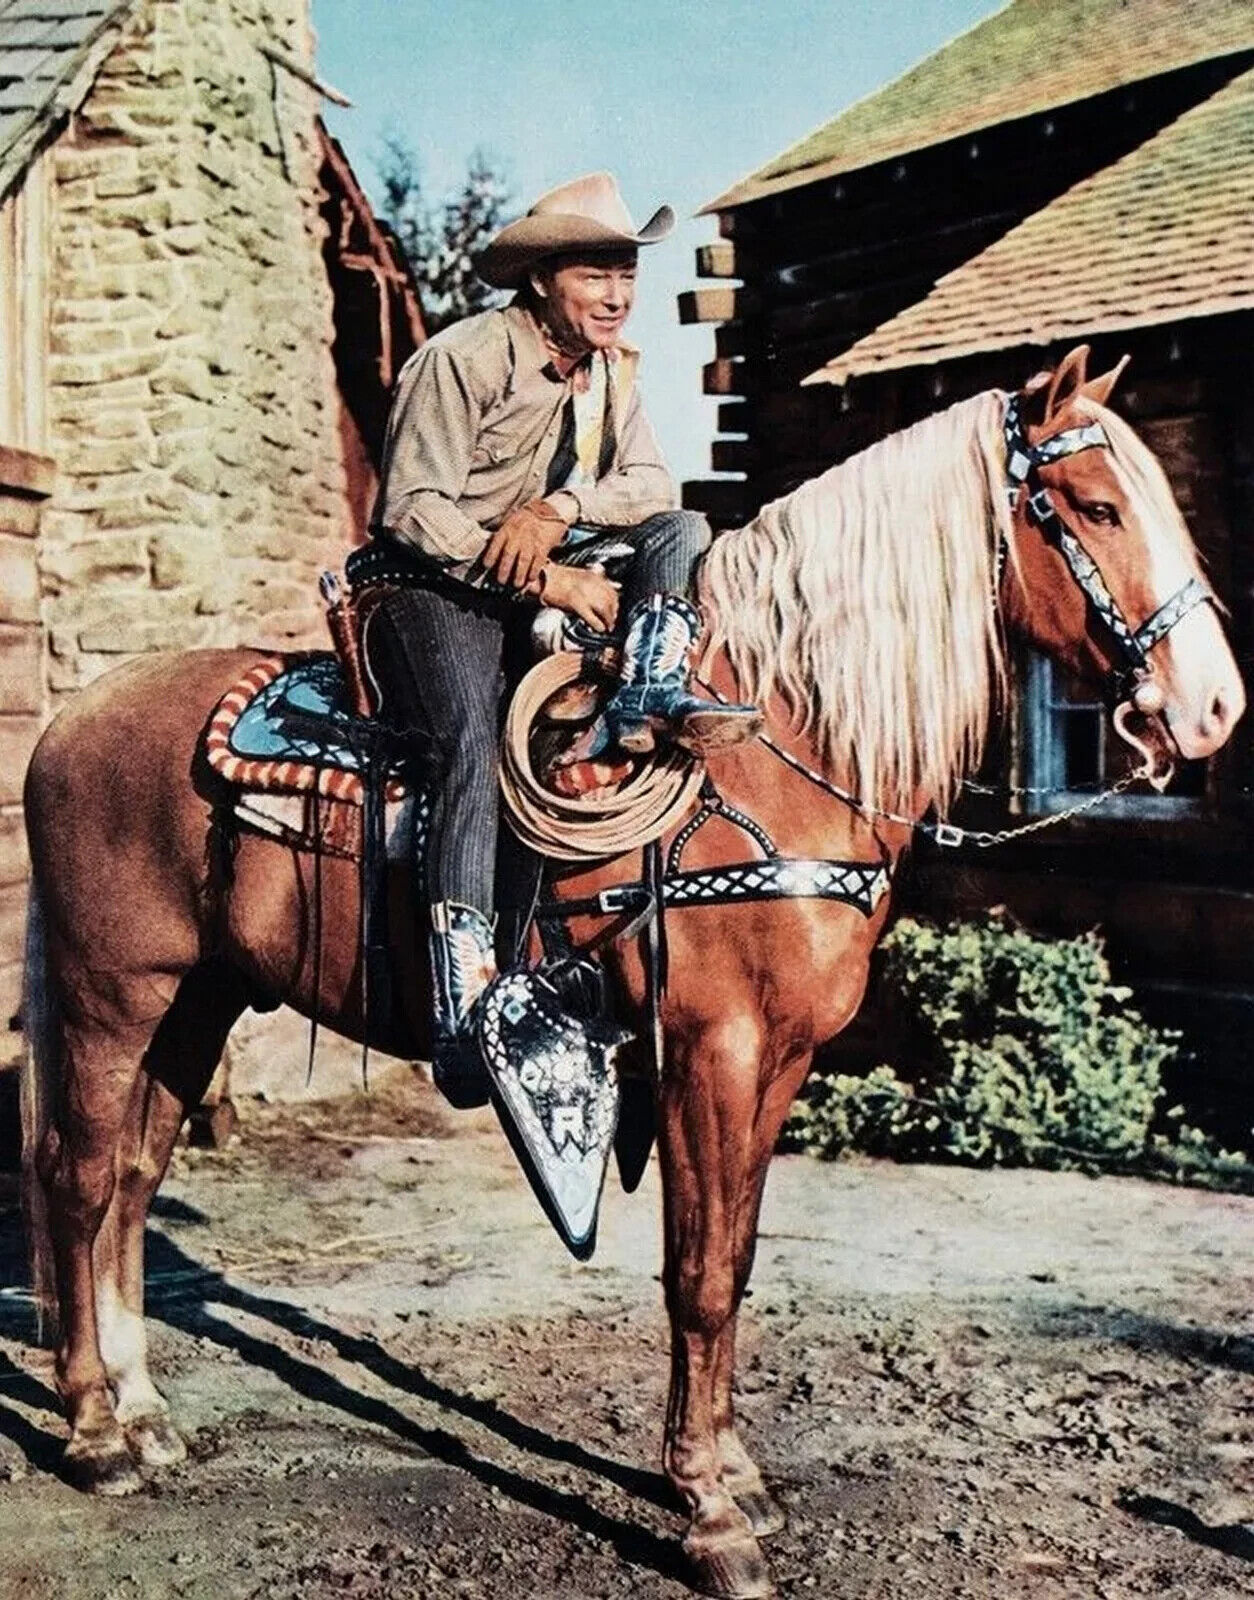 America's Cowboy ROY ROGERS & His Horse TRIGGER Classic Picture Photo 8.5x11